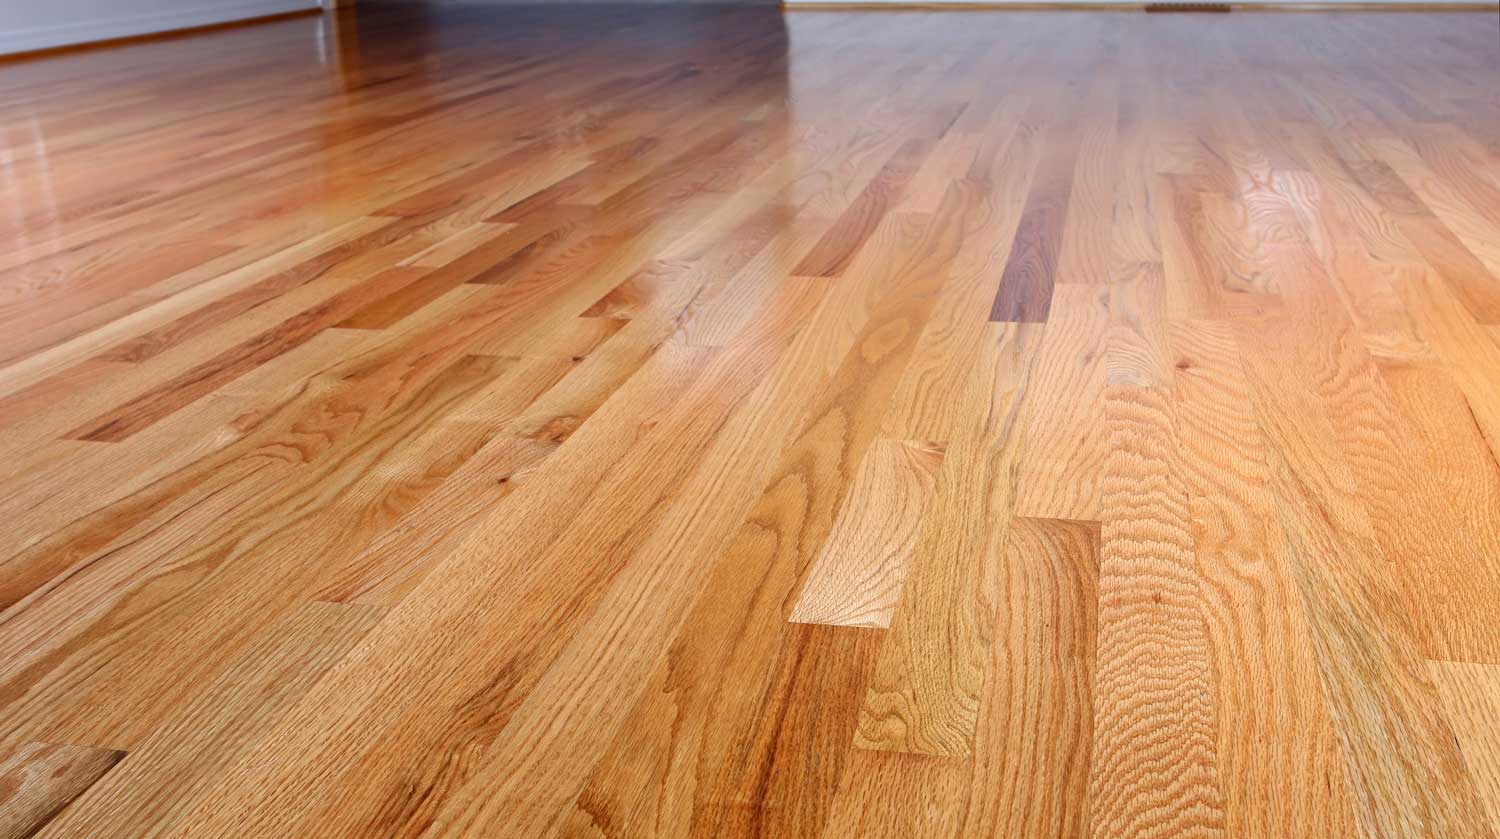 Cost To Refinish A Hardwood Floor, How Much To Refinish Hardwood Floors Per Square Foot